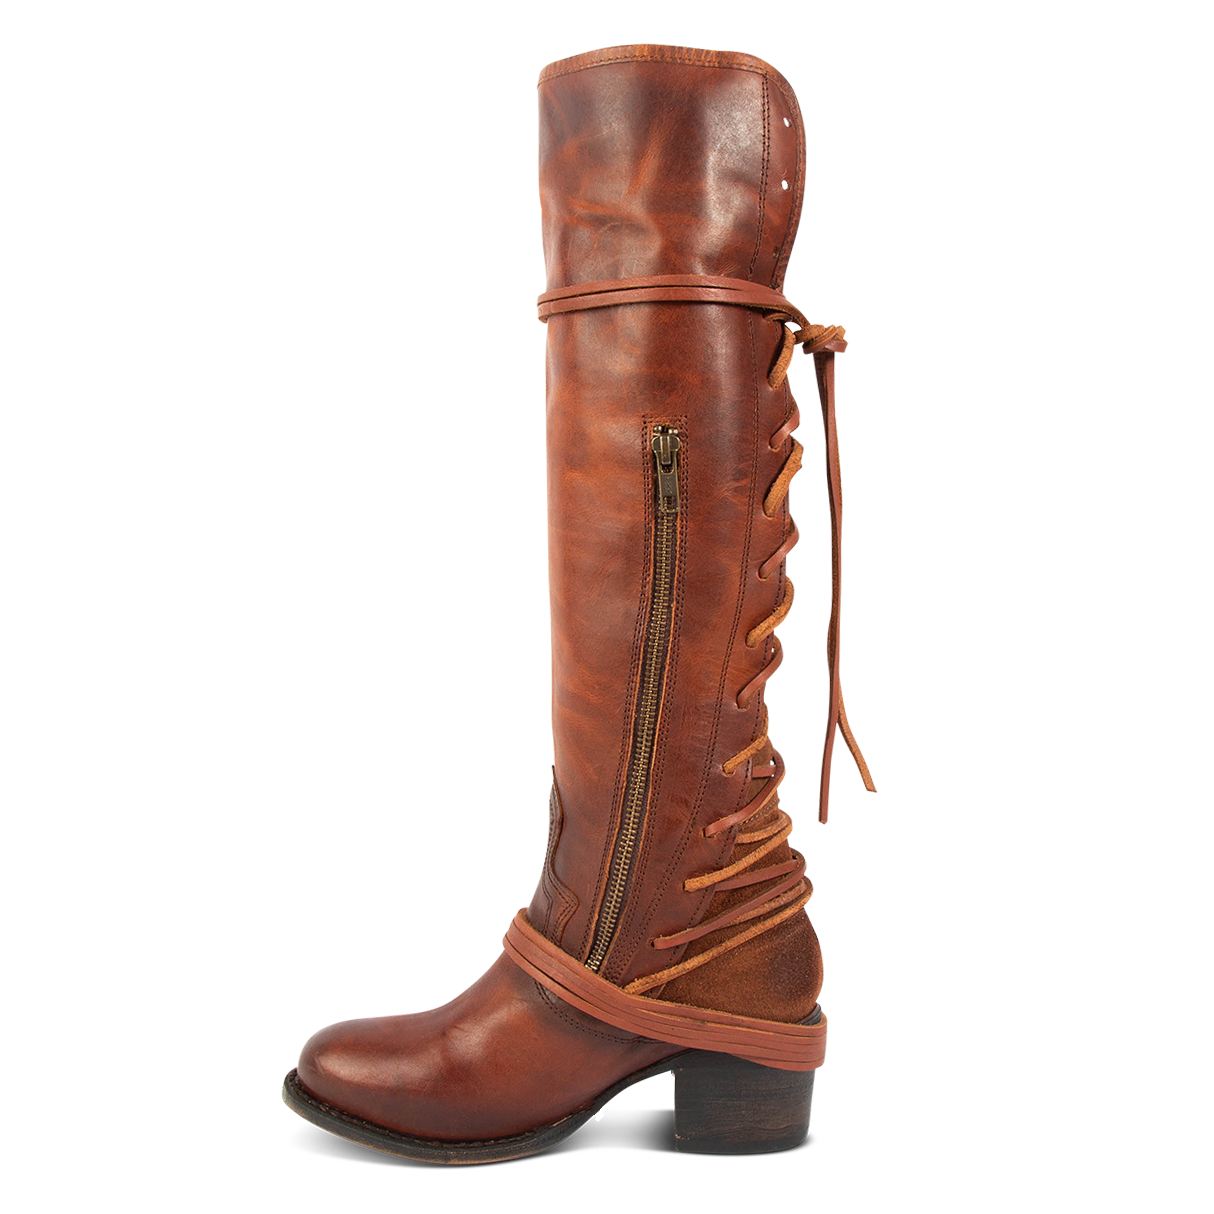 Inside view showing working brass zip closure and adjustable wrap around laces on FREEBIRD women's Coal cognac tall boot